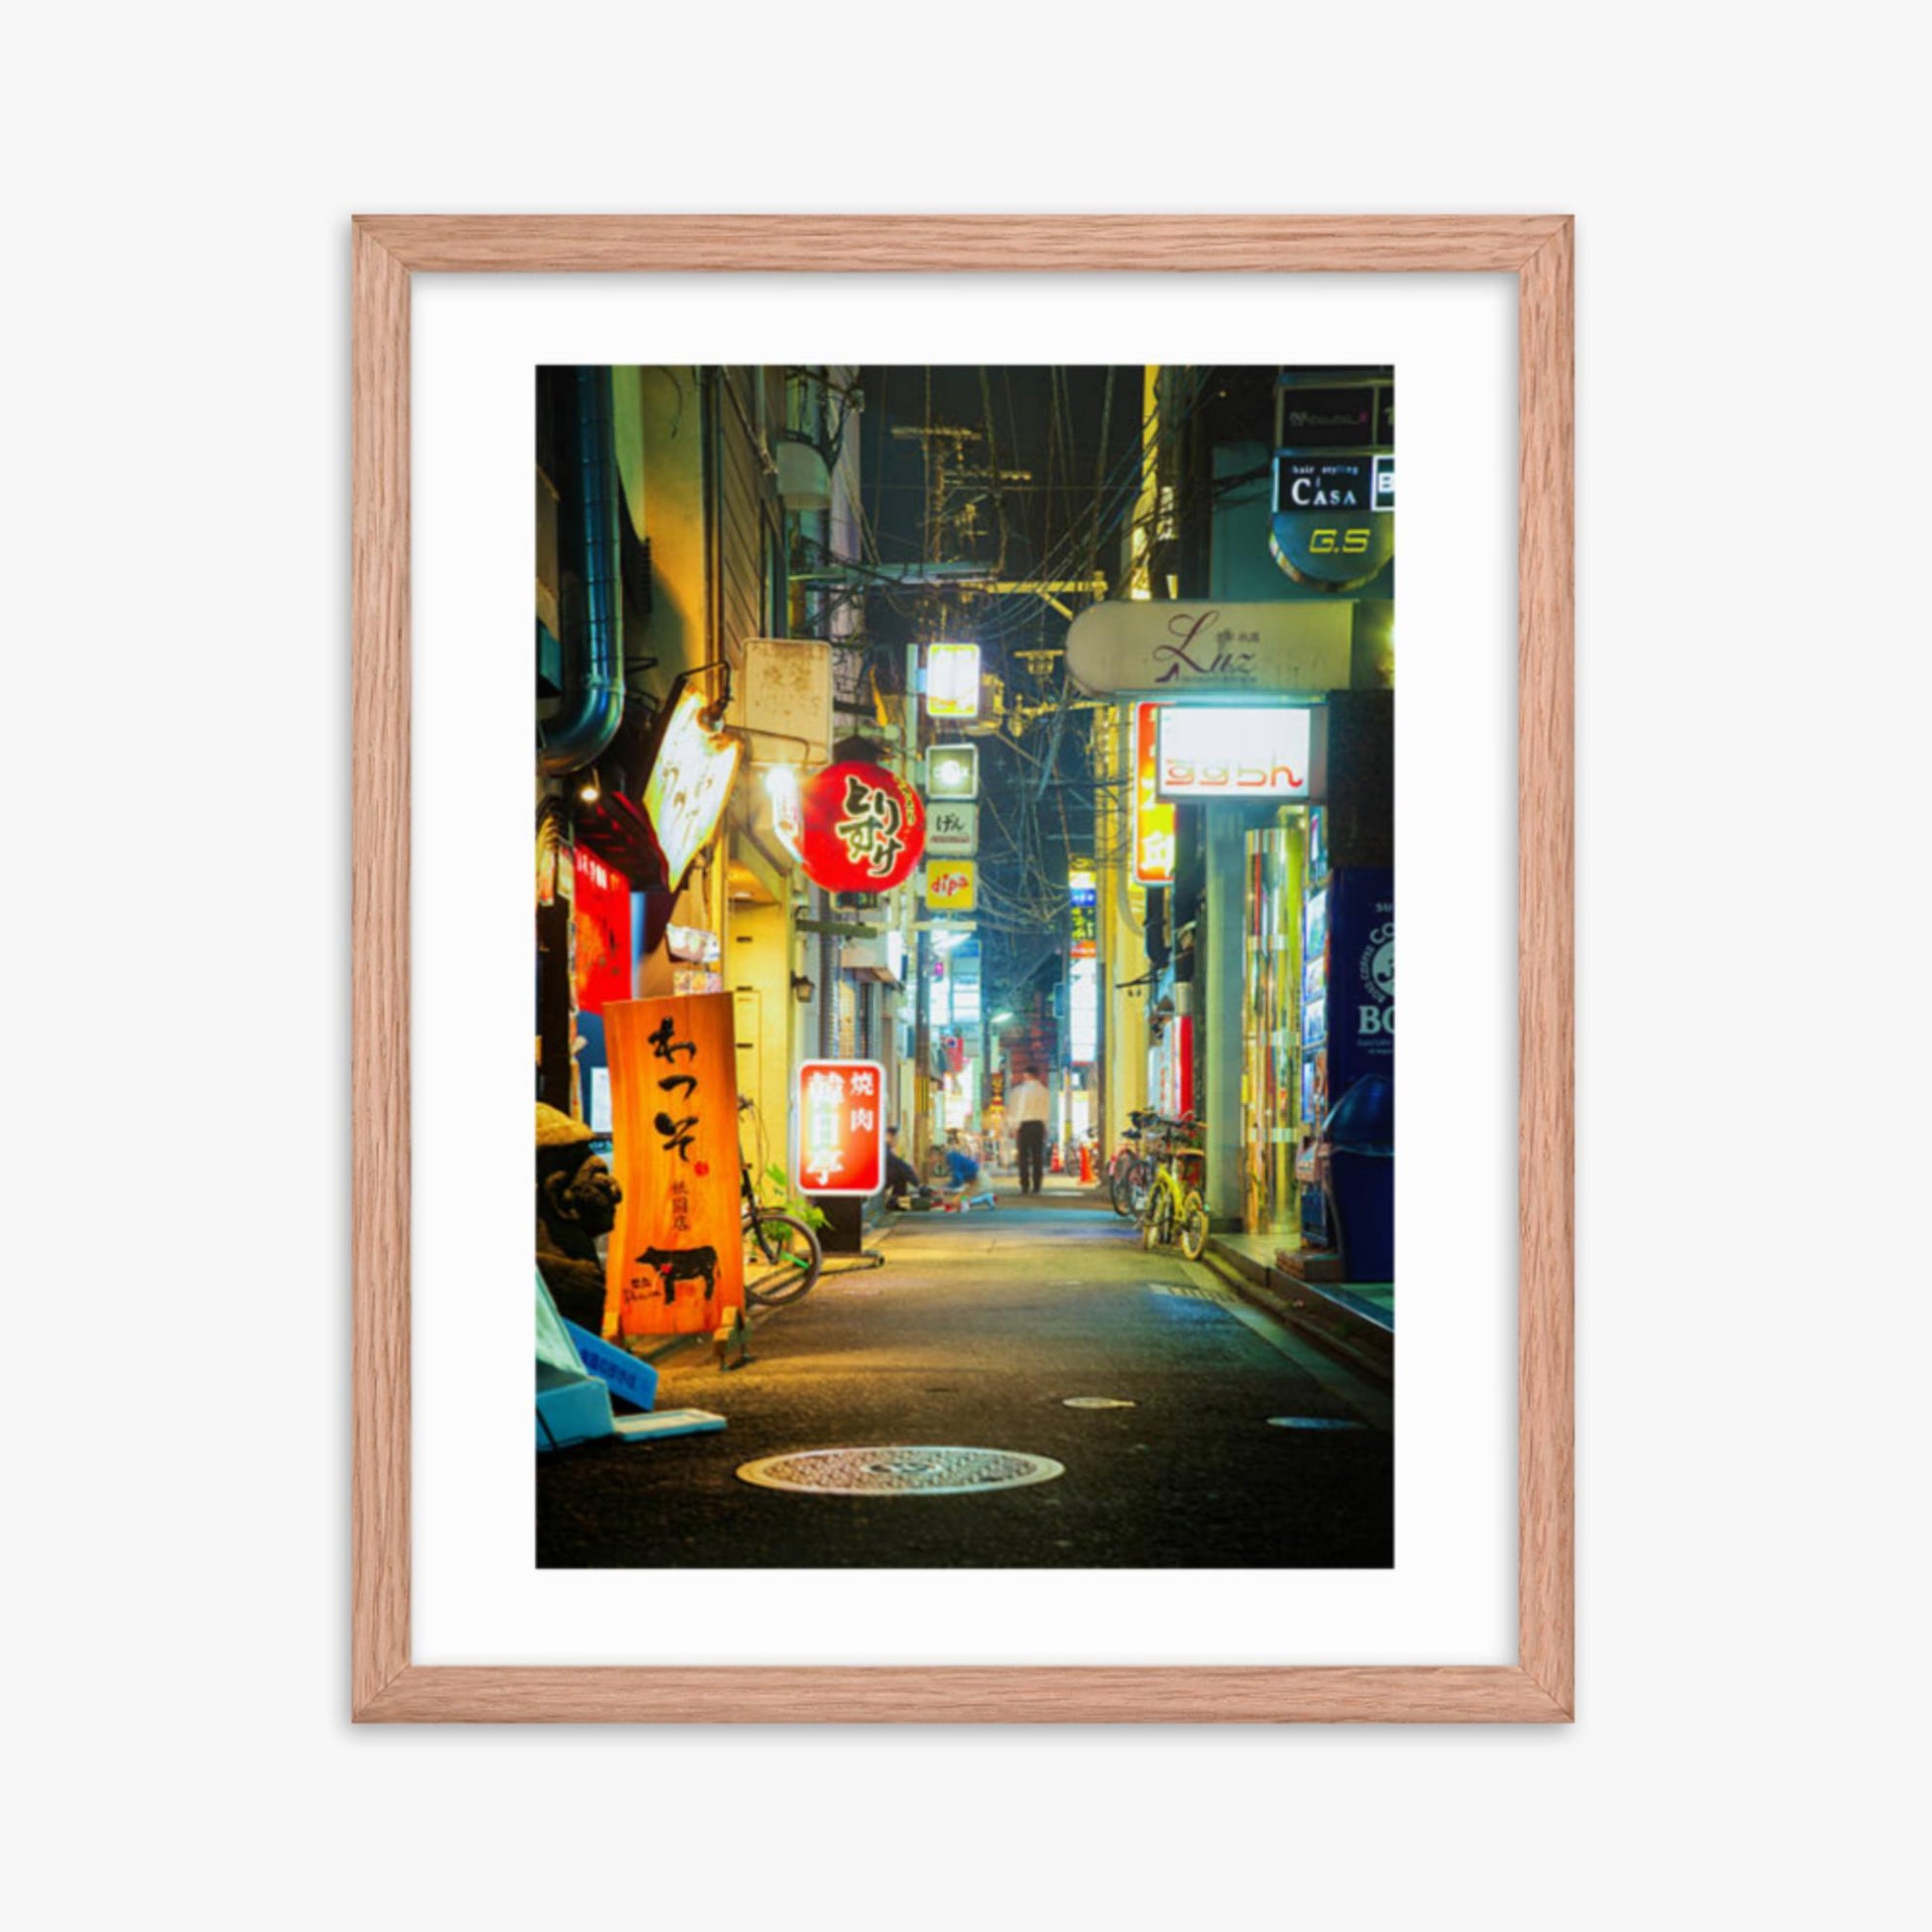 Kyoto, Japan backstreet at night 16x20 in Poster With Oak Frame